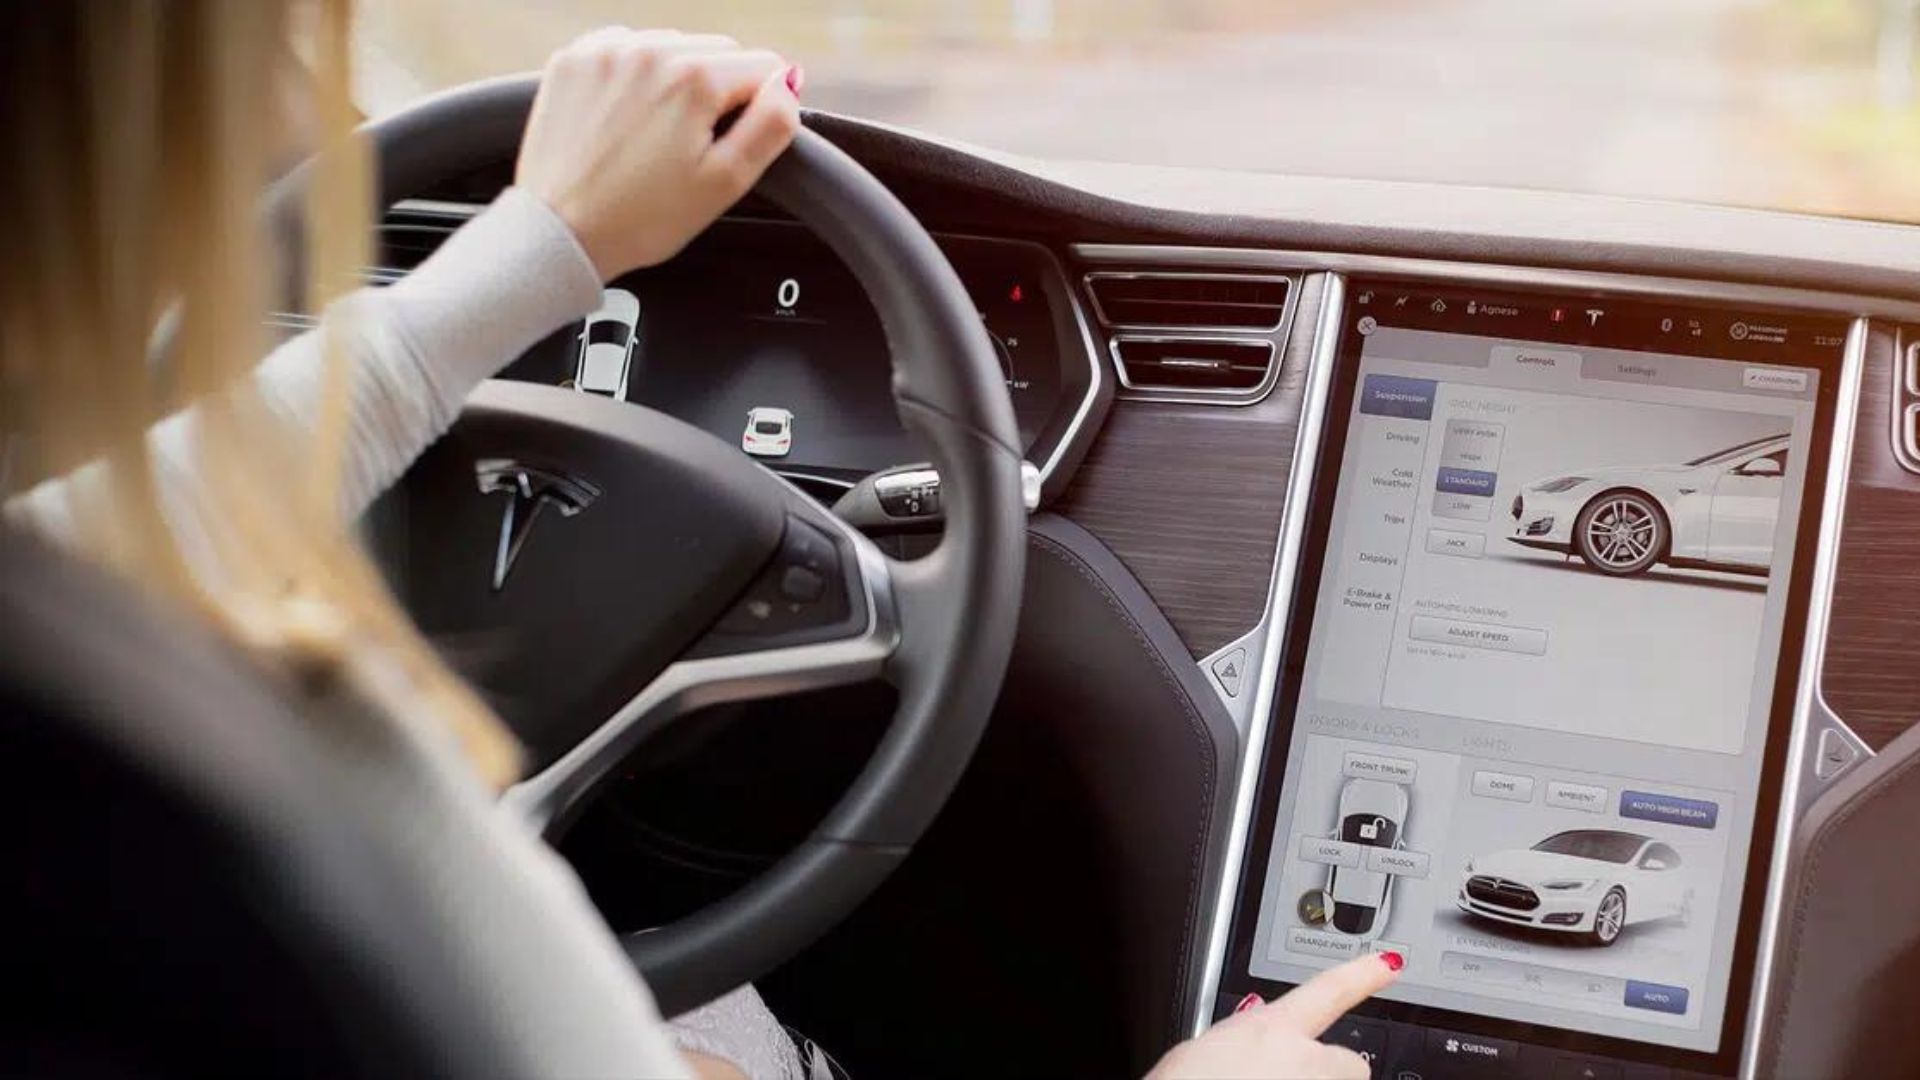 For the first time, Tesla will defend itself in court against claims that the Autopilot driver assistance system was the cause of a fatal crash.